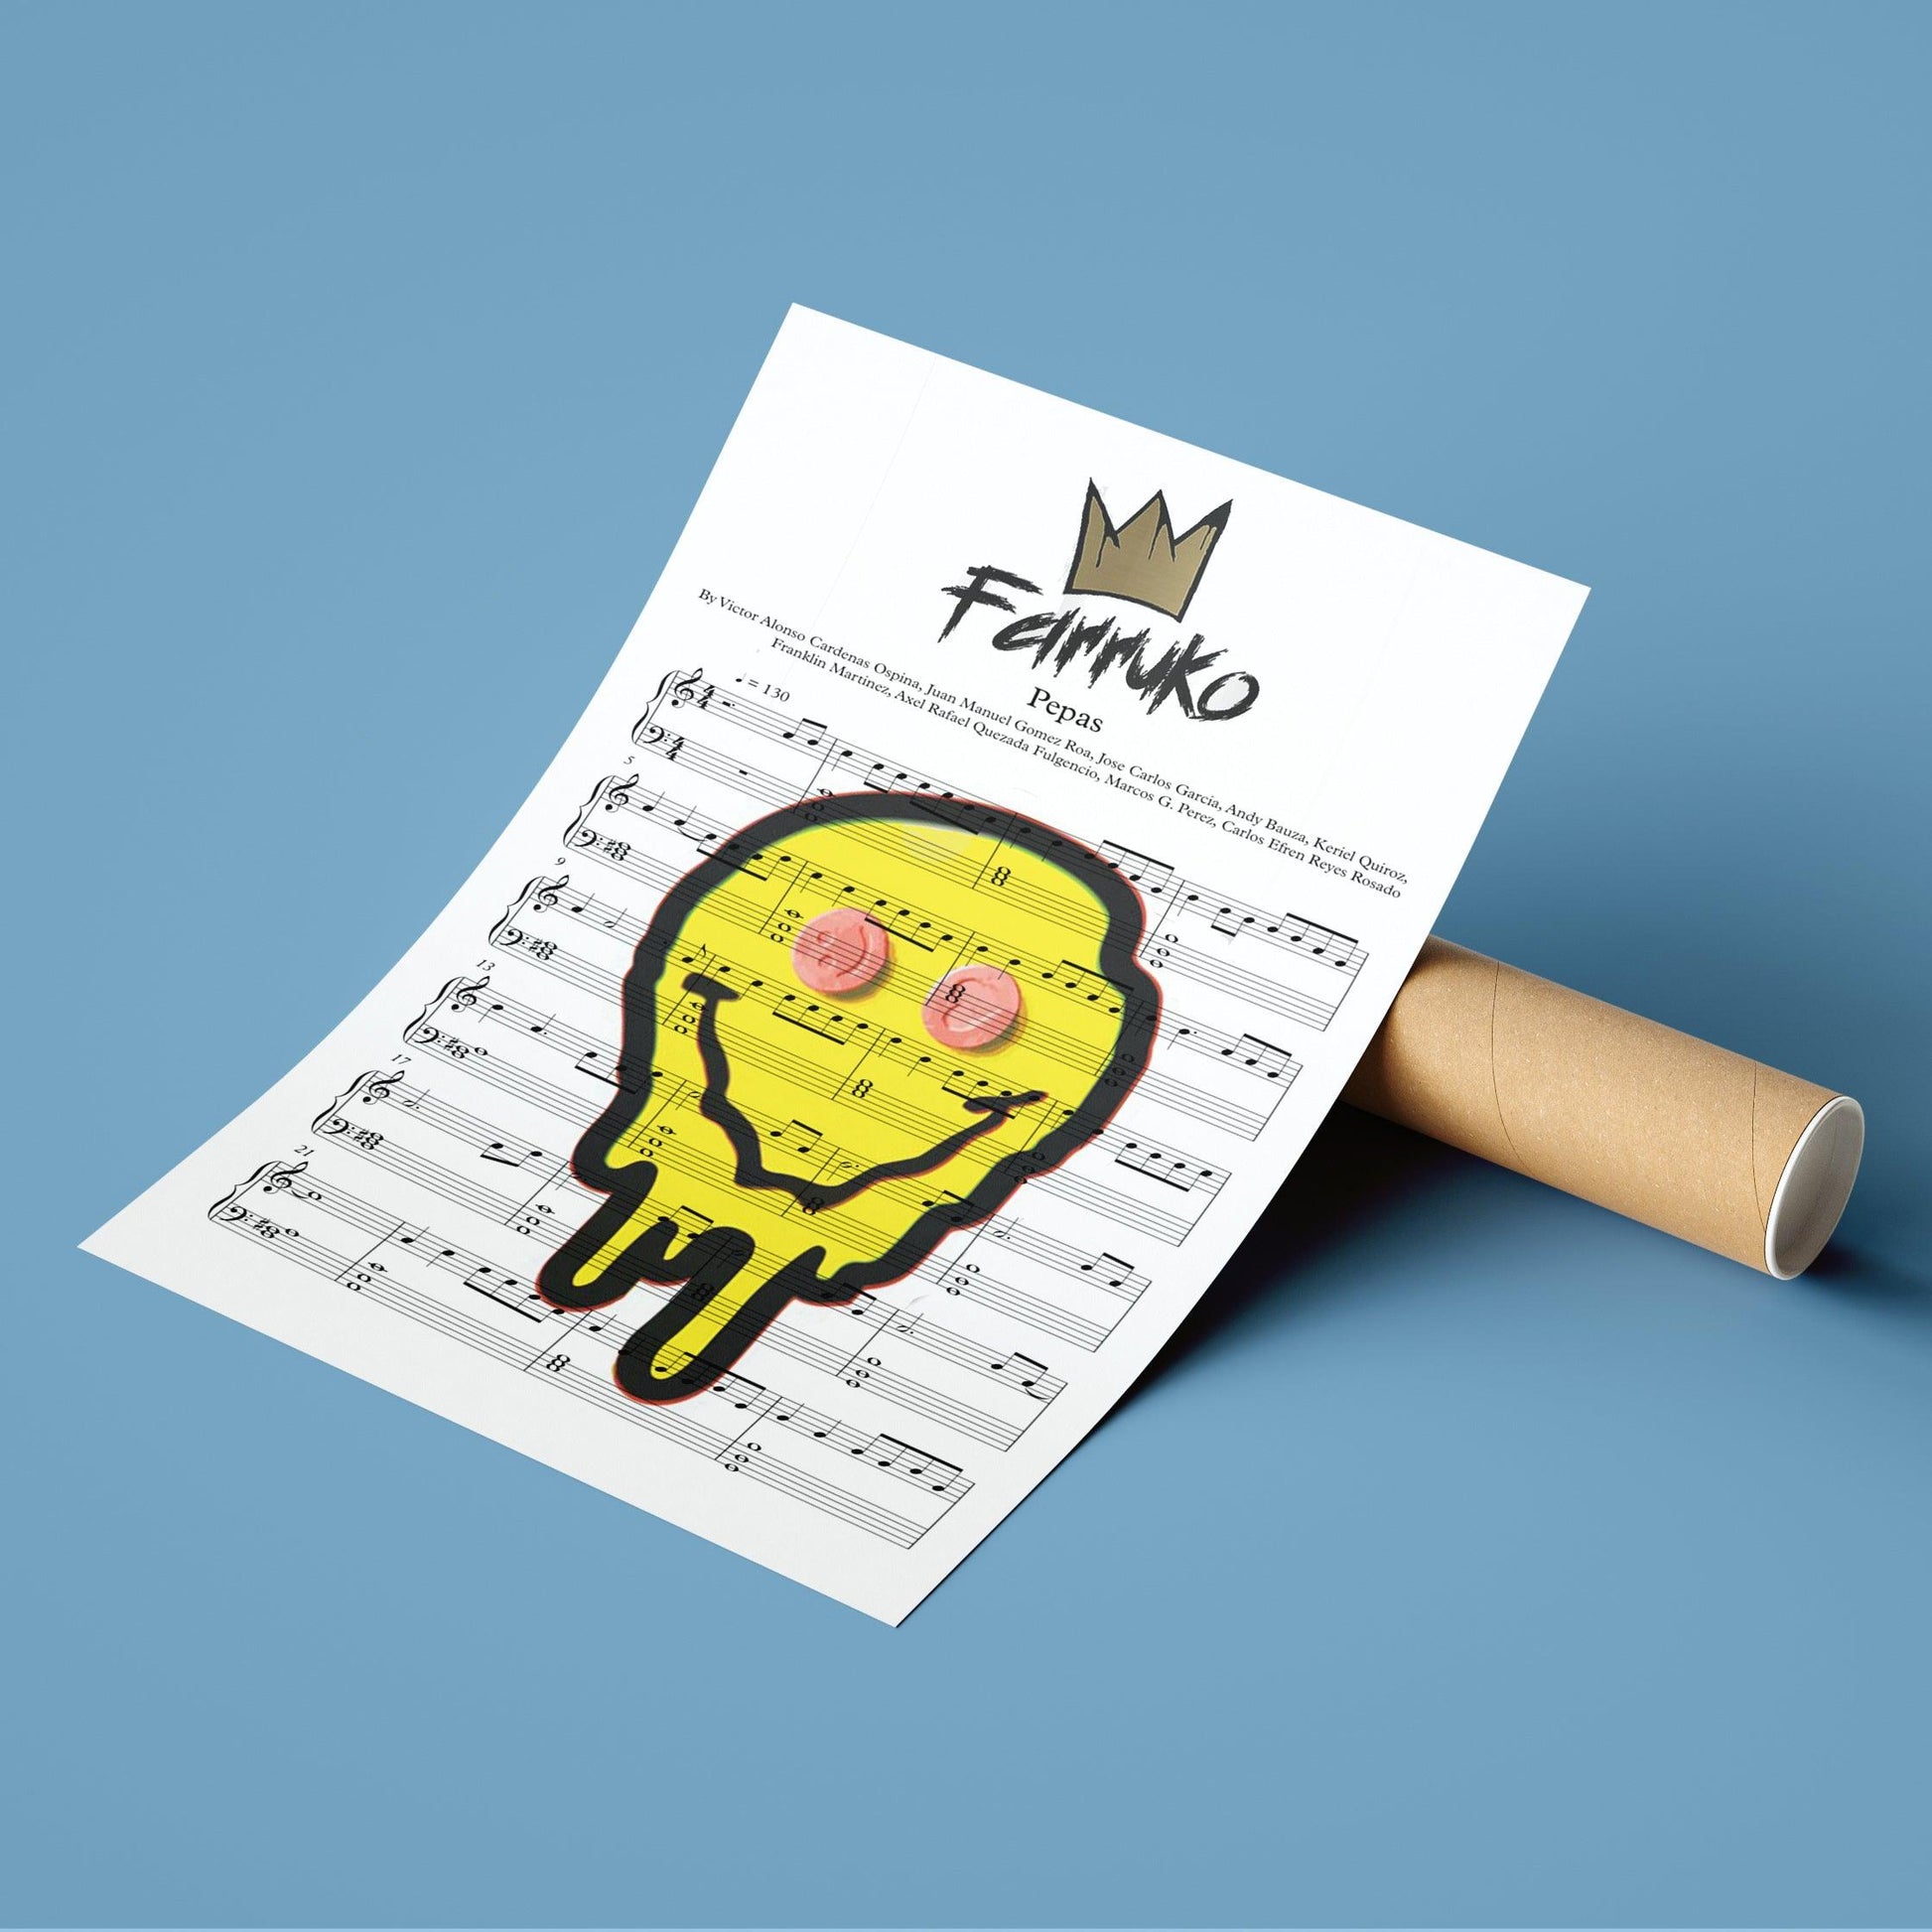 Farruko - Pepas Song Print | Song Music Sheet Notes Print Everyone has a favorite song especially Farruko Pepas Print, and now you can show the score as printed staff. The personal favorite song sheet print shows the song chosen as the score. 